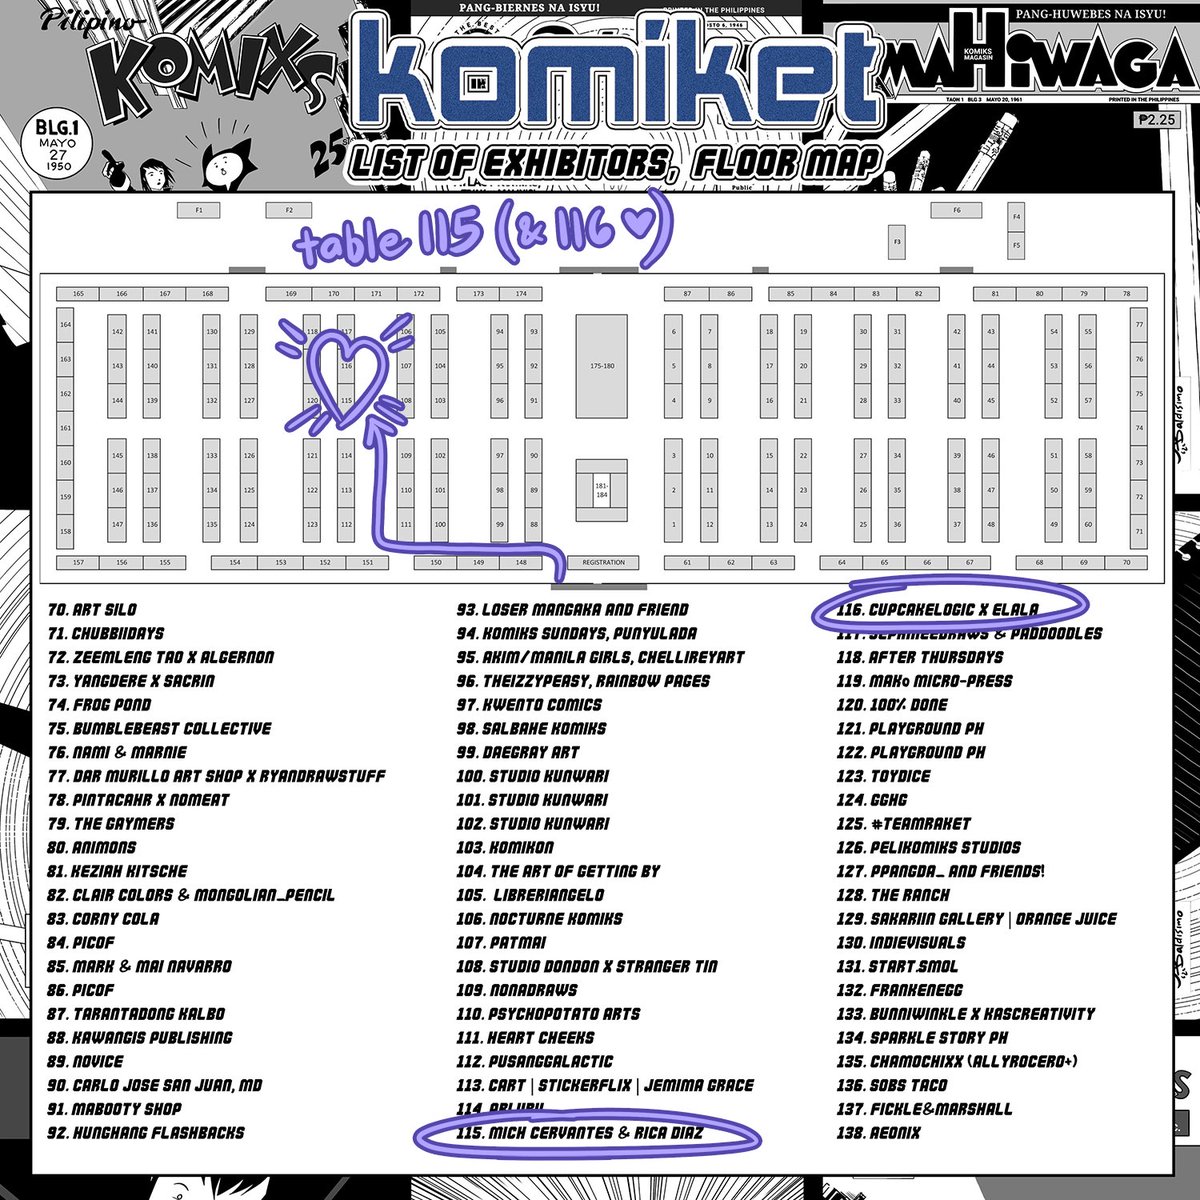 my merch catalog for komiket this october 29-30 💜 all my prints from earlier this year will be available along with some new goodies! come find me n my besties @wwofmoi @cupcakelogic and @elalalart at table 115 and 116 (refer to the map below!) hope to see you there 🫡